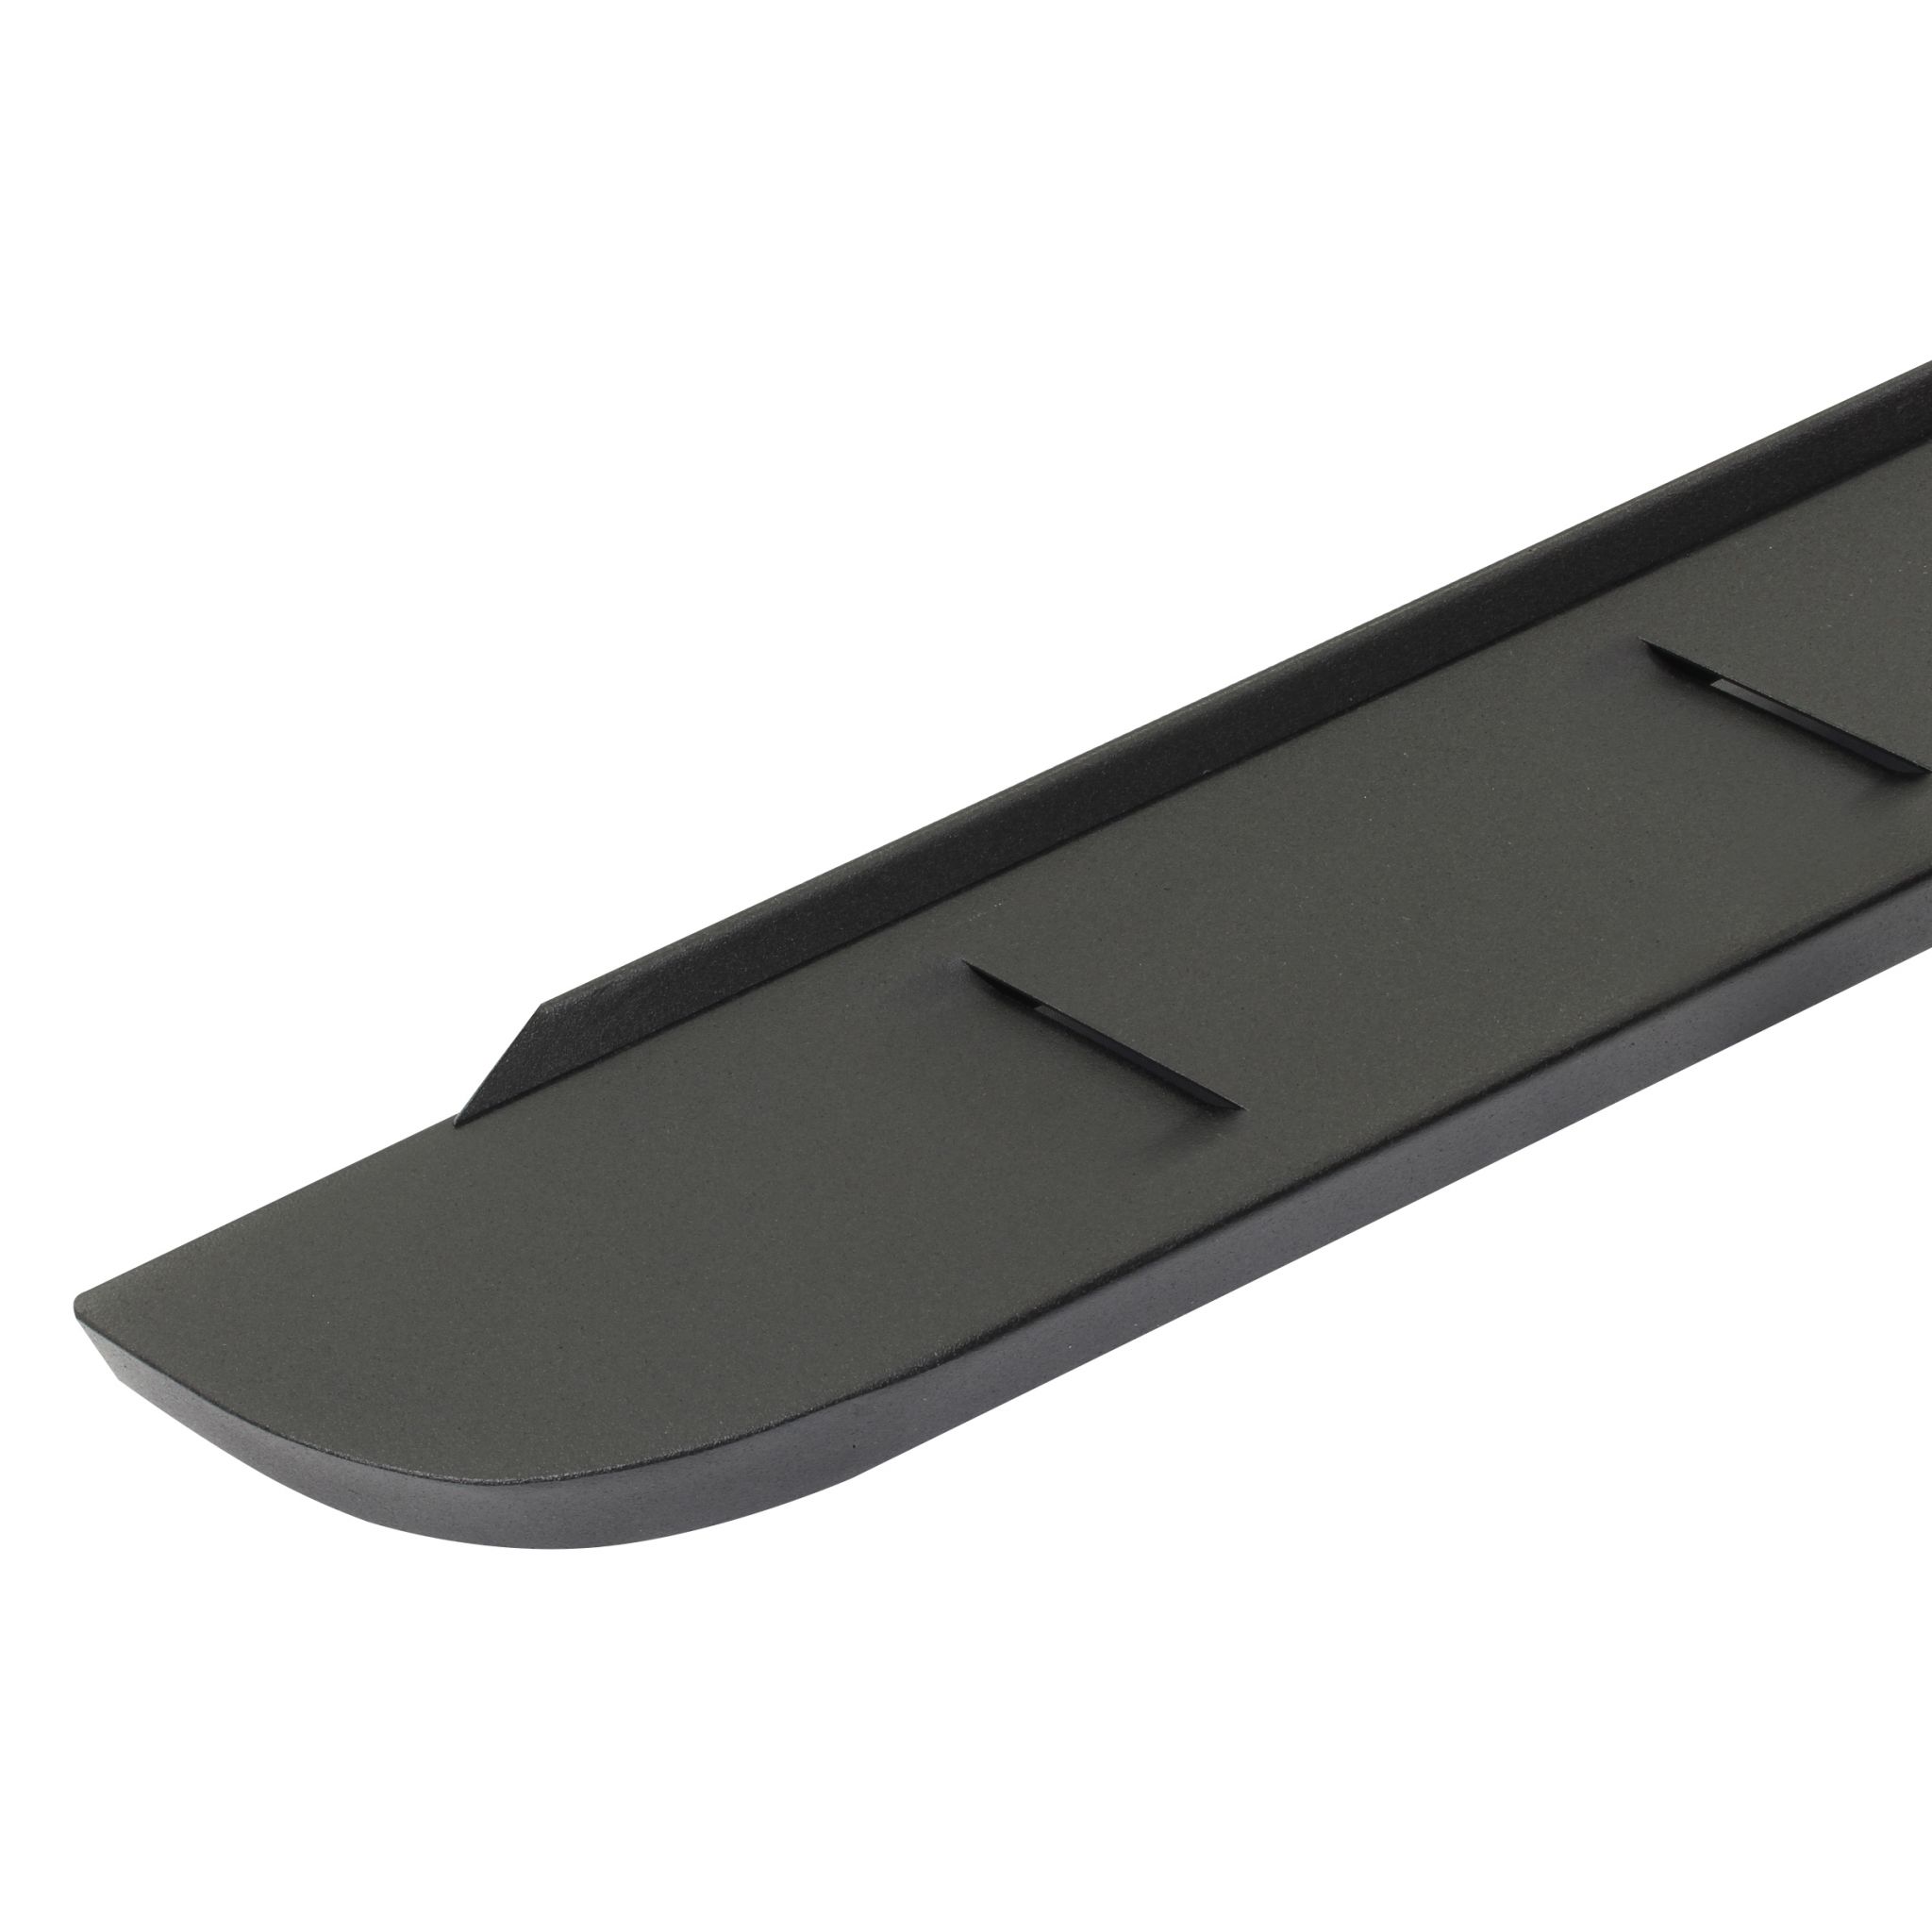 Go Rhino 634417348SPC - RB10 Slim Line Running Boards With Mounting Brackets - Textured Black